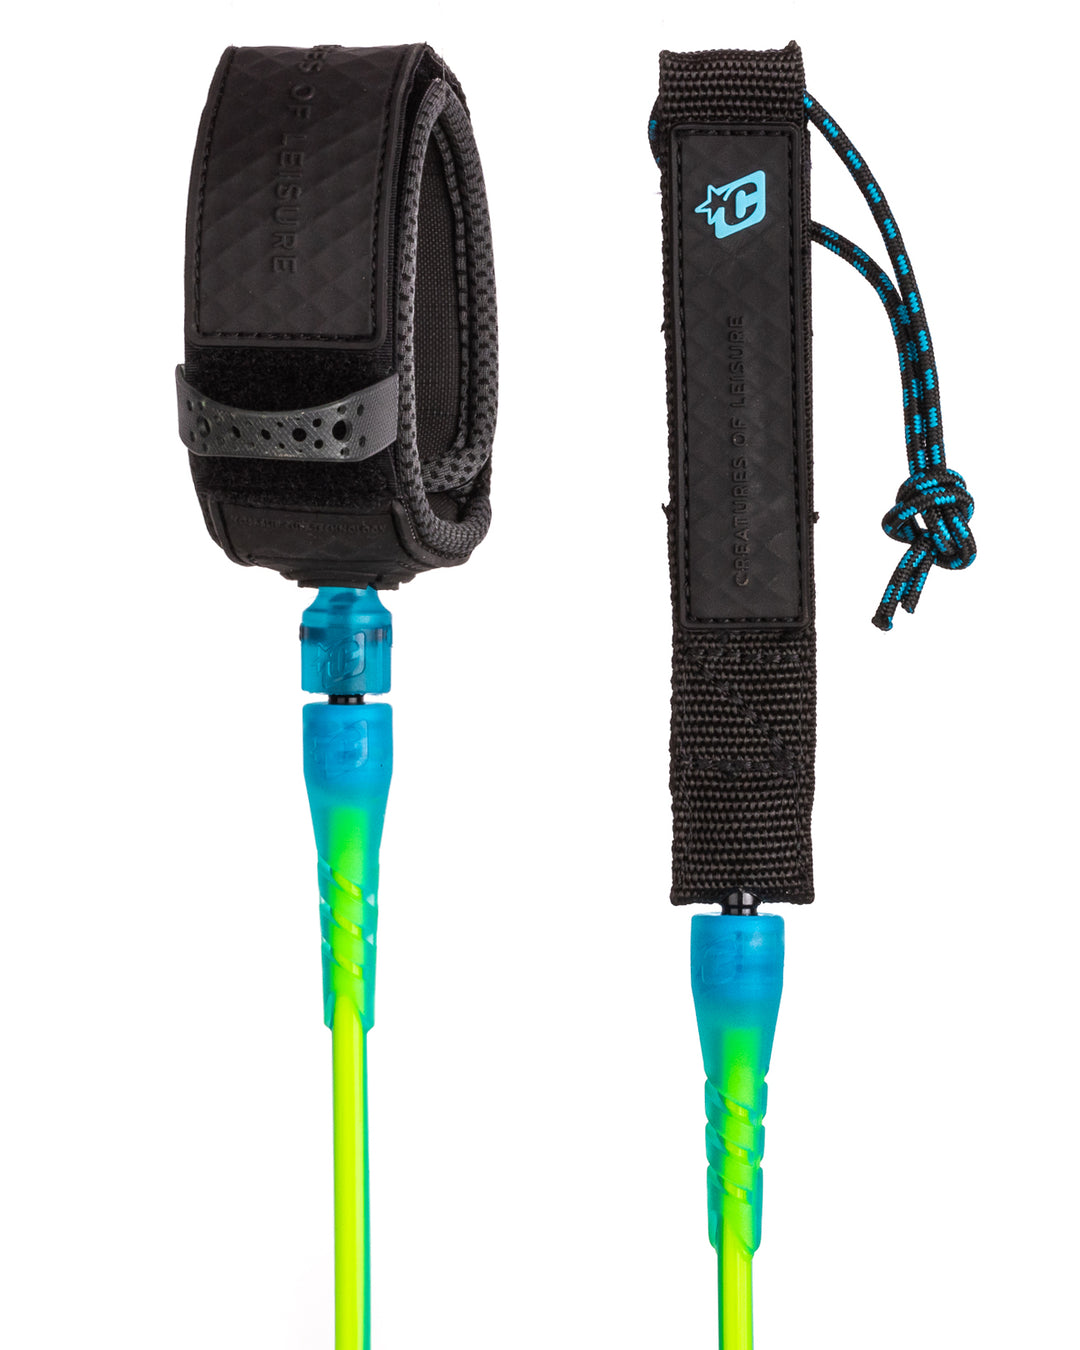 Reliance Comp 6 Leash | Candy Cord